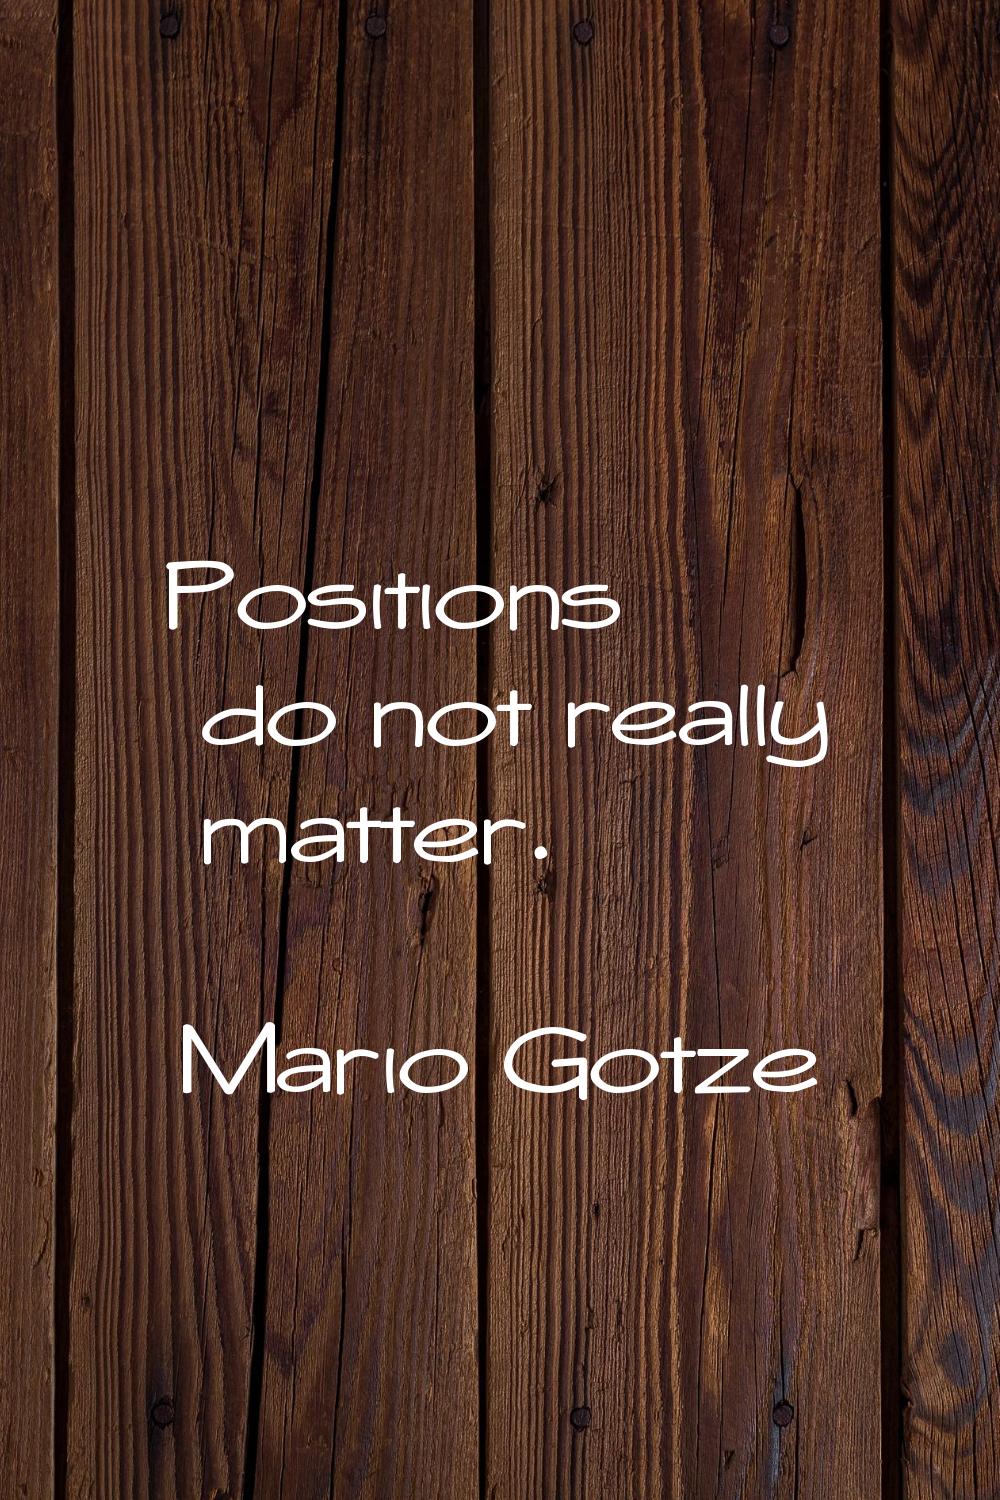 Positions do not really matter.